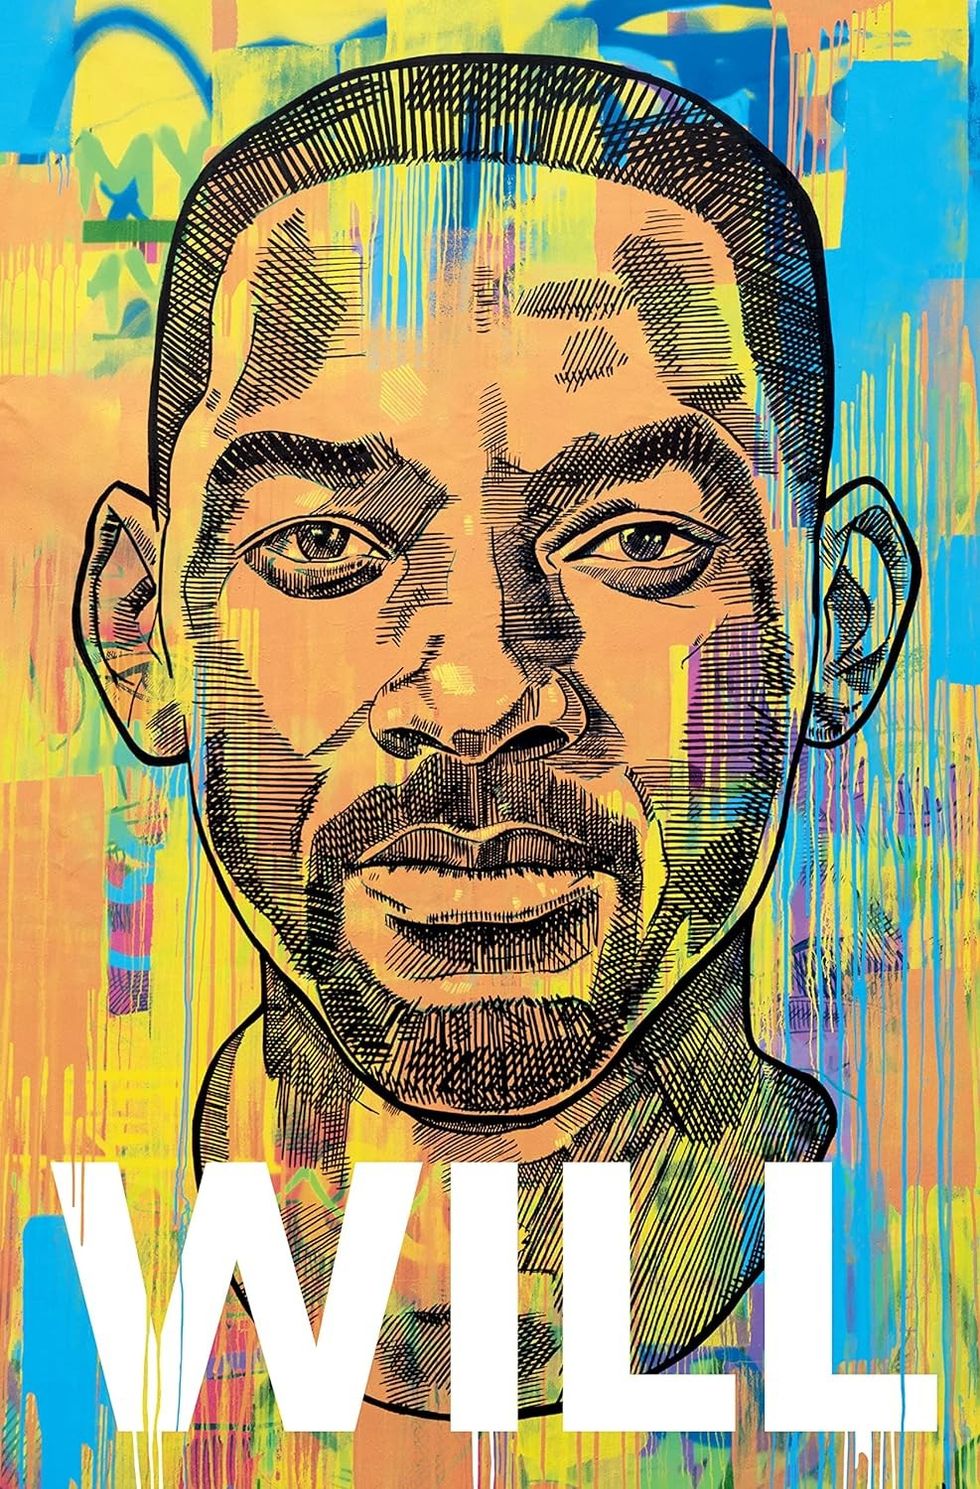 "Will" by Will Smith